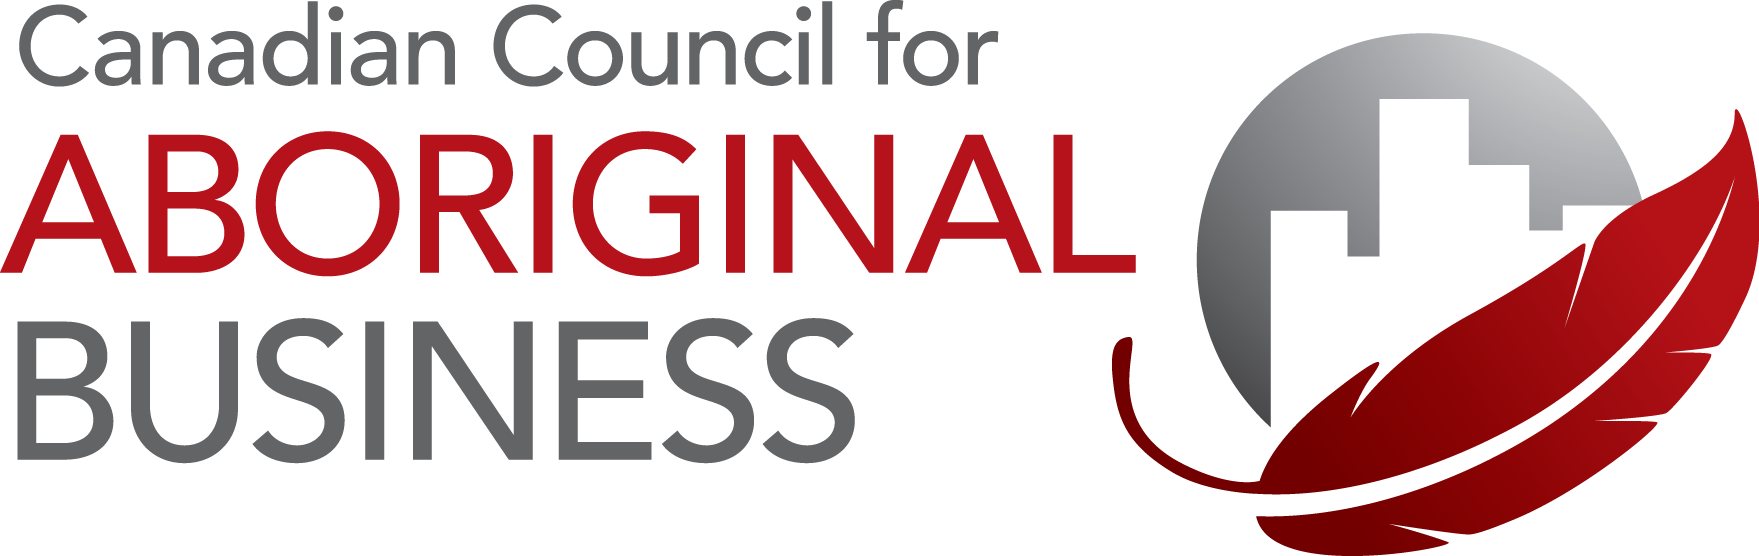 Canadian Council for Aboriginal Business 